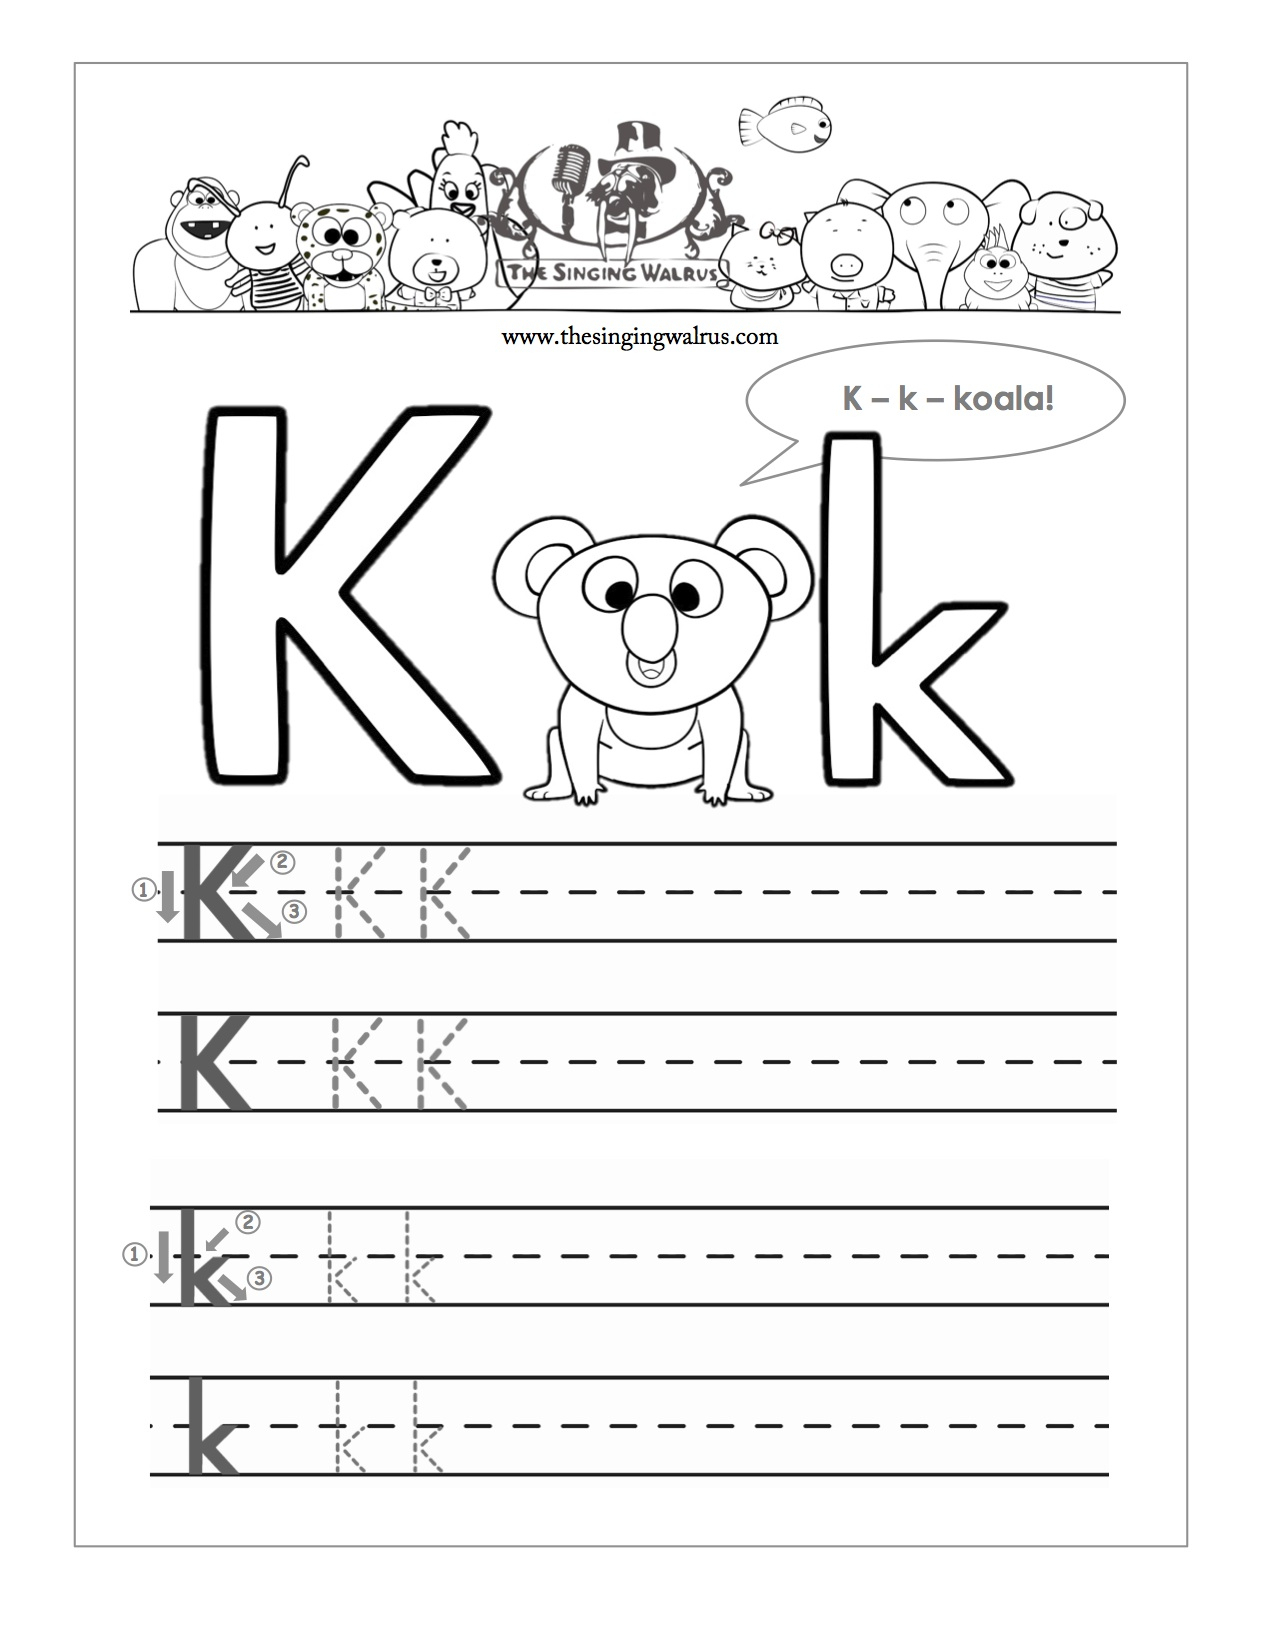 15 Learning The Letter K Worksheets | Kittybabylove regarding Letter K Worksheets Twisty Noodle